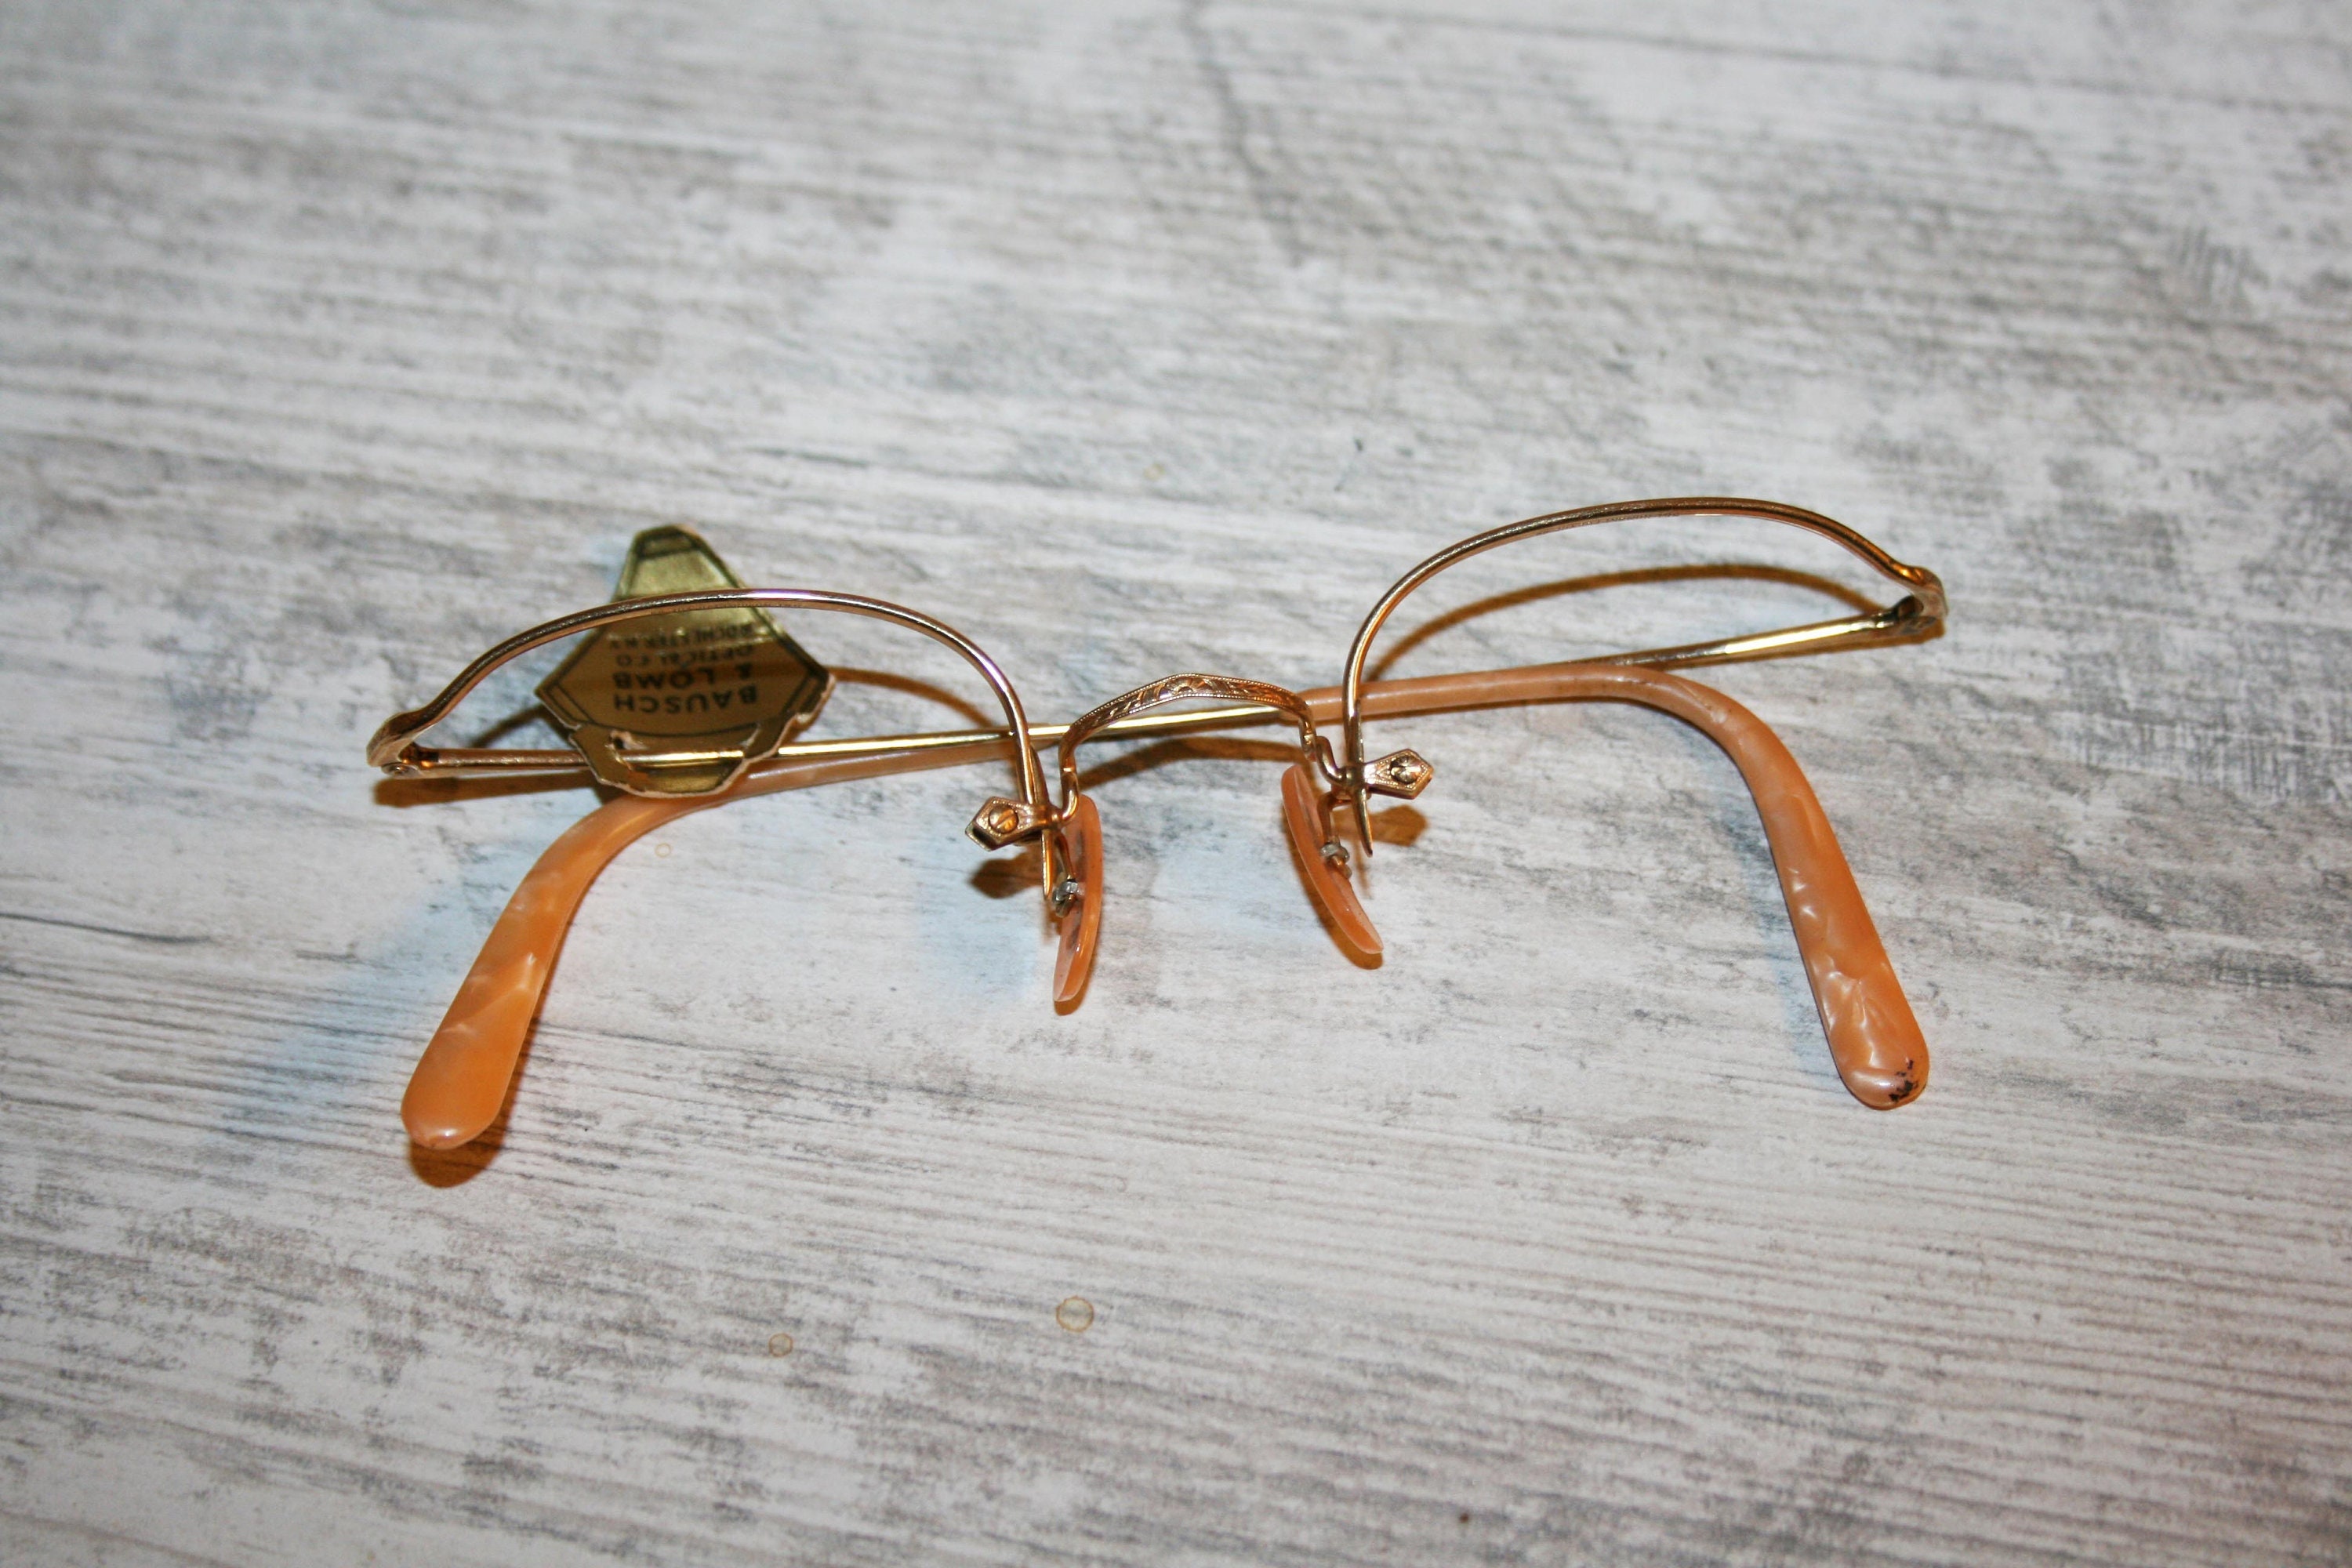 Bausch Lomb Glasses - Etsy